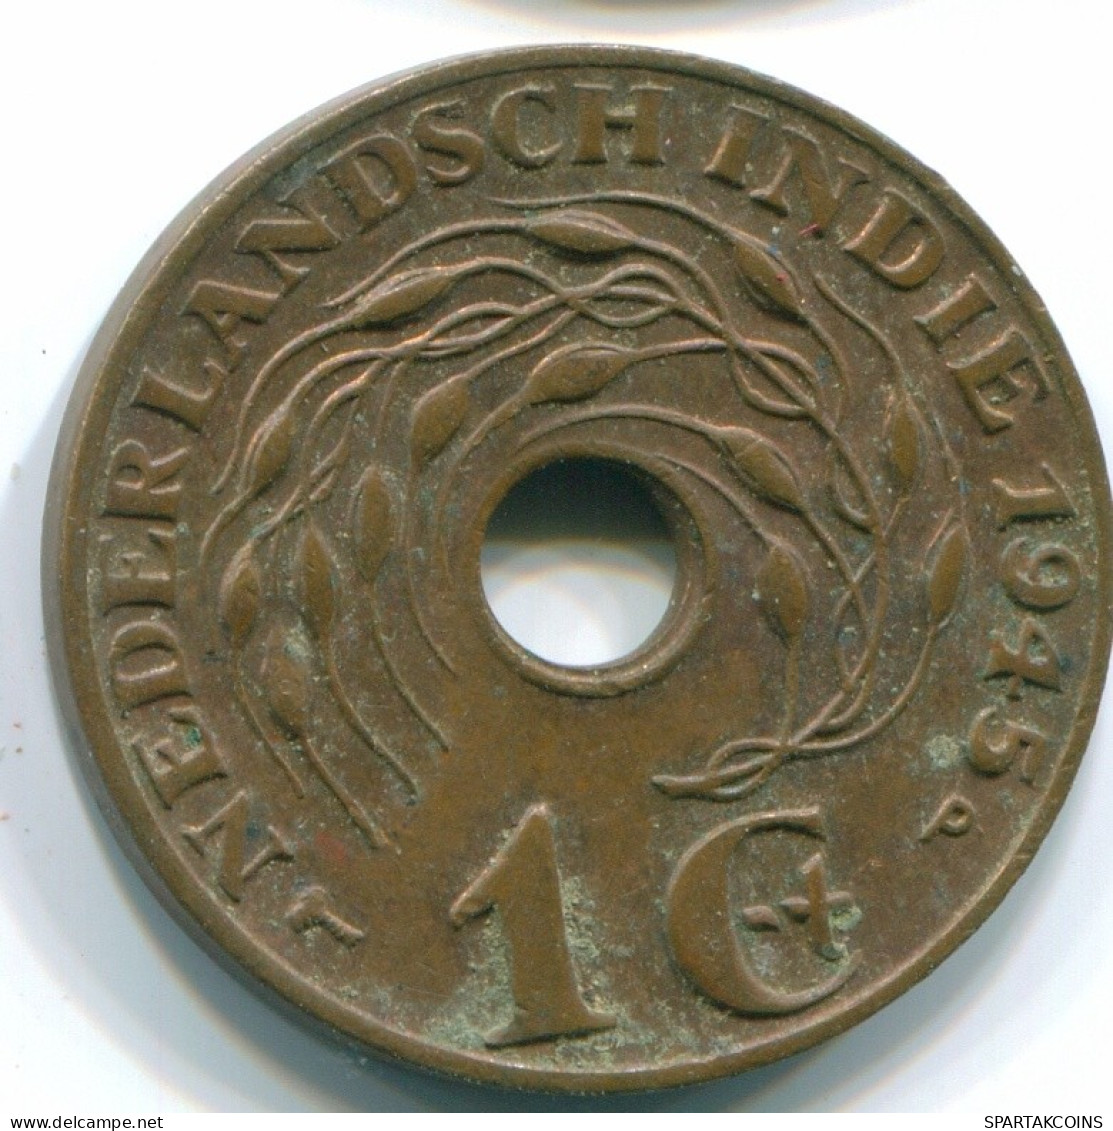 1 CENT 1945 P NETHERLANDS EAST INDIES INDONESIA Bronze Colonial Coin #S10343.U.A - Indie Olandesi